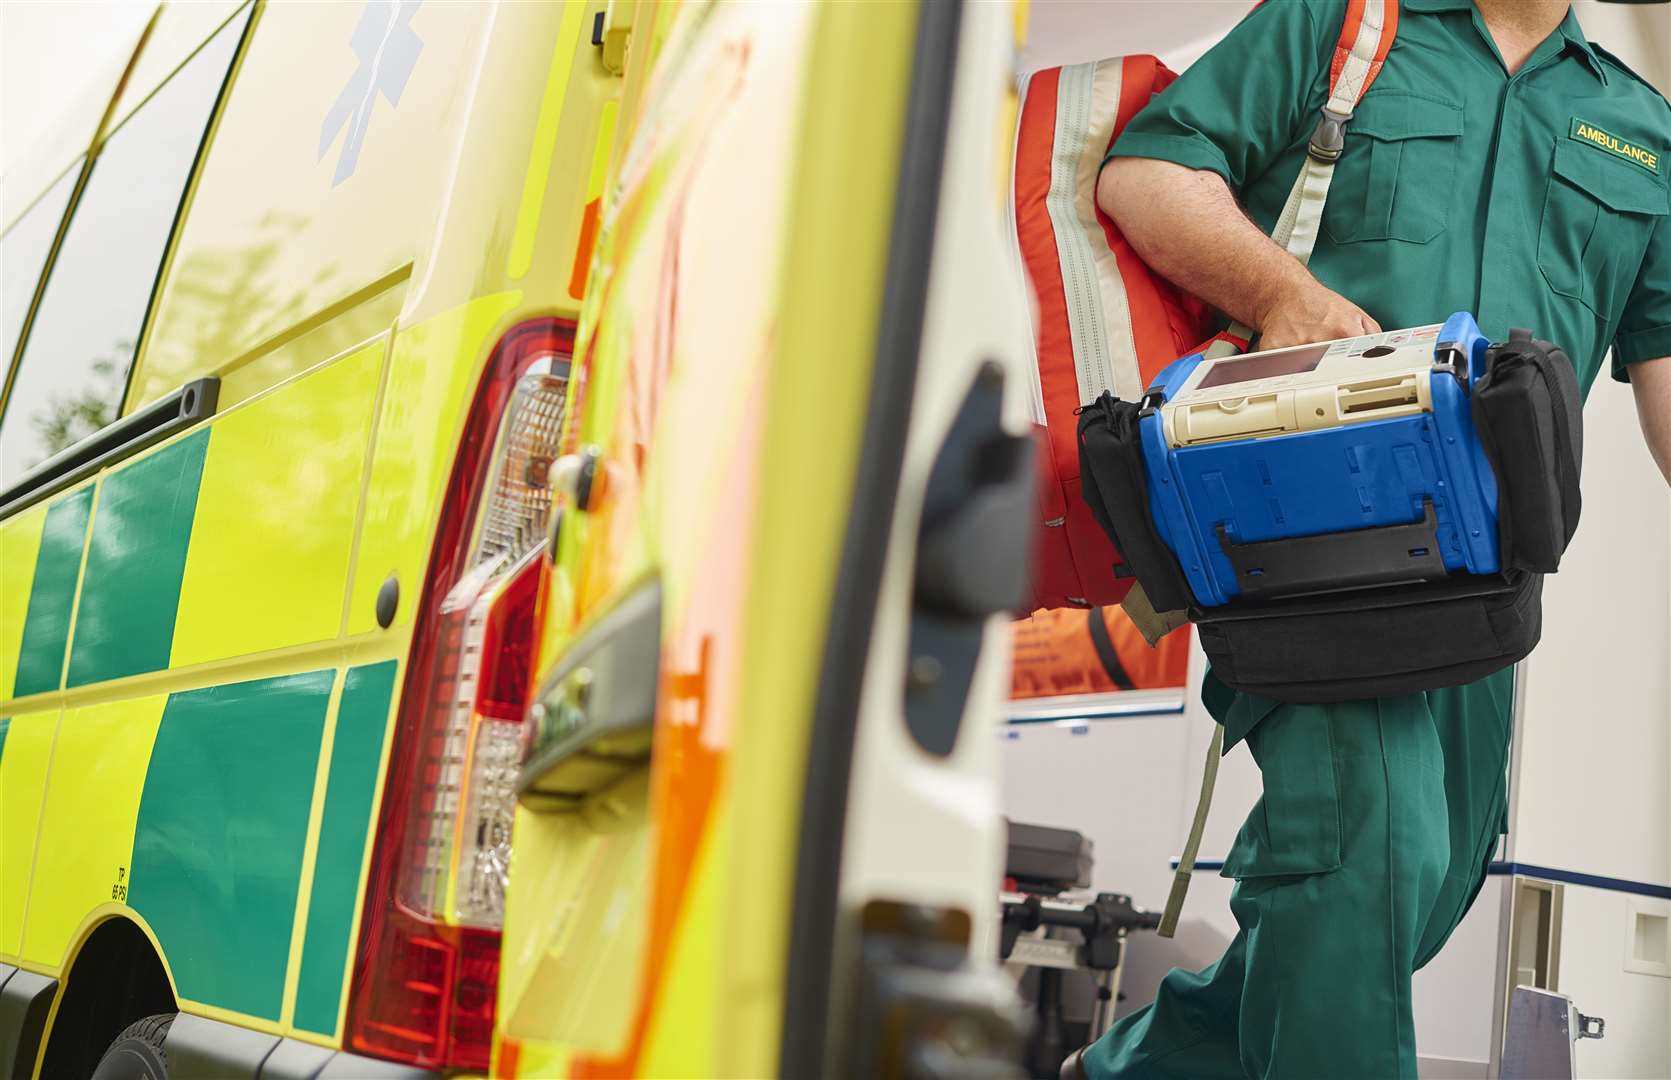 A bag was stolen from an ambulance responding to an emergency call (Stock picture)